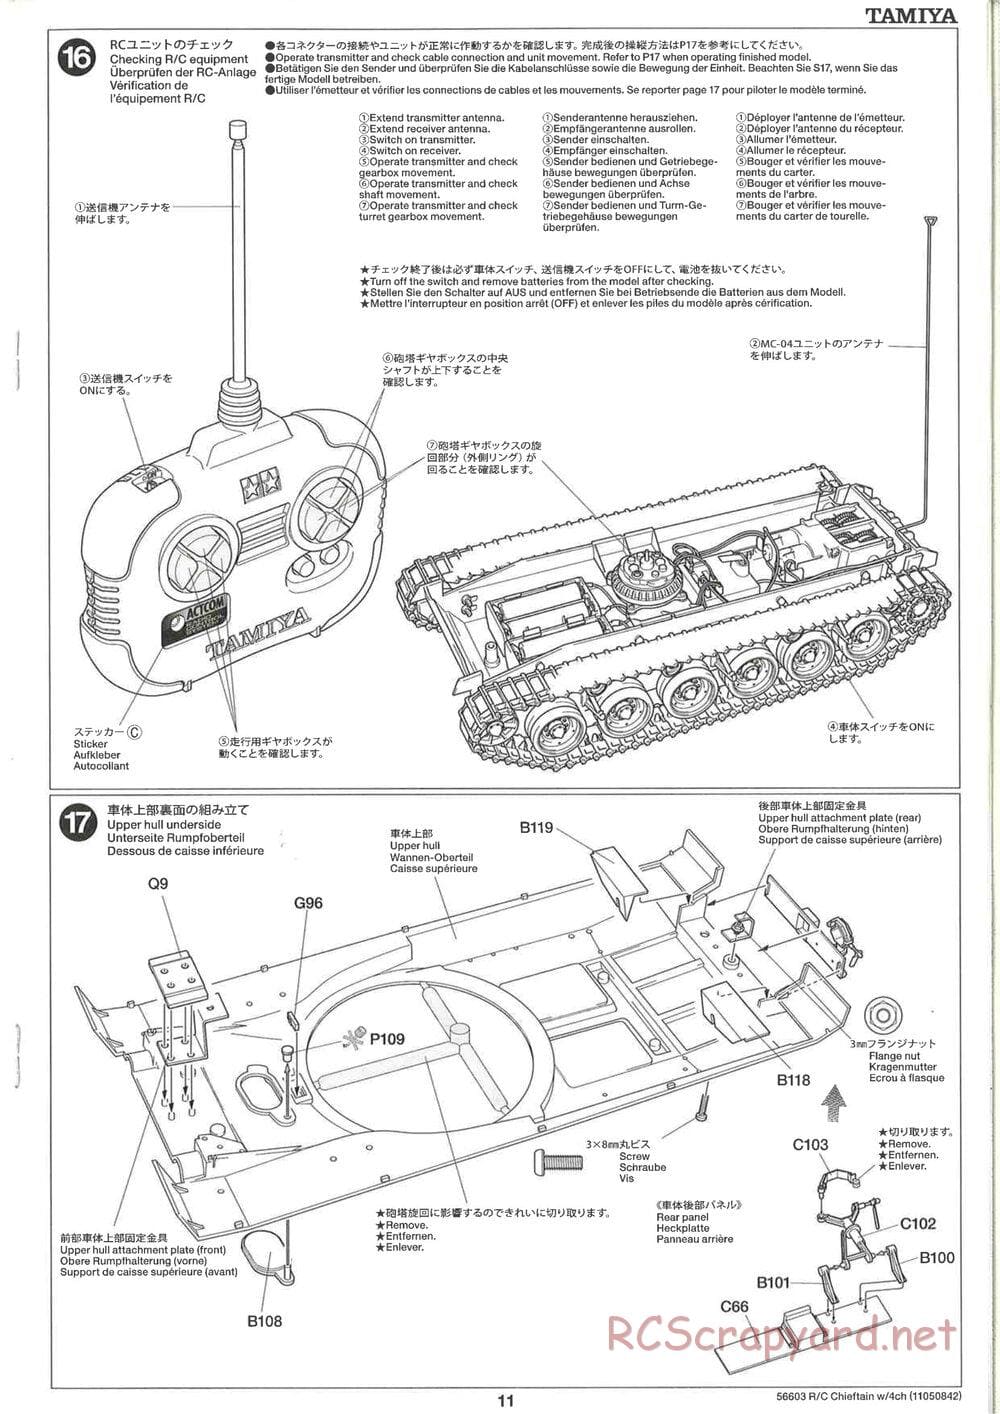 Tamiya - British Army Battle Tank Cheiftain - 1/25 Scale Chassis - Manual - Page 11